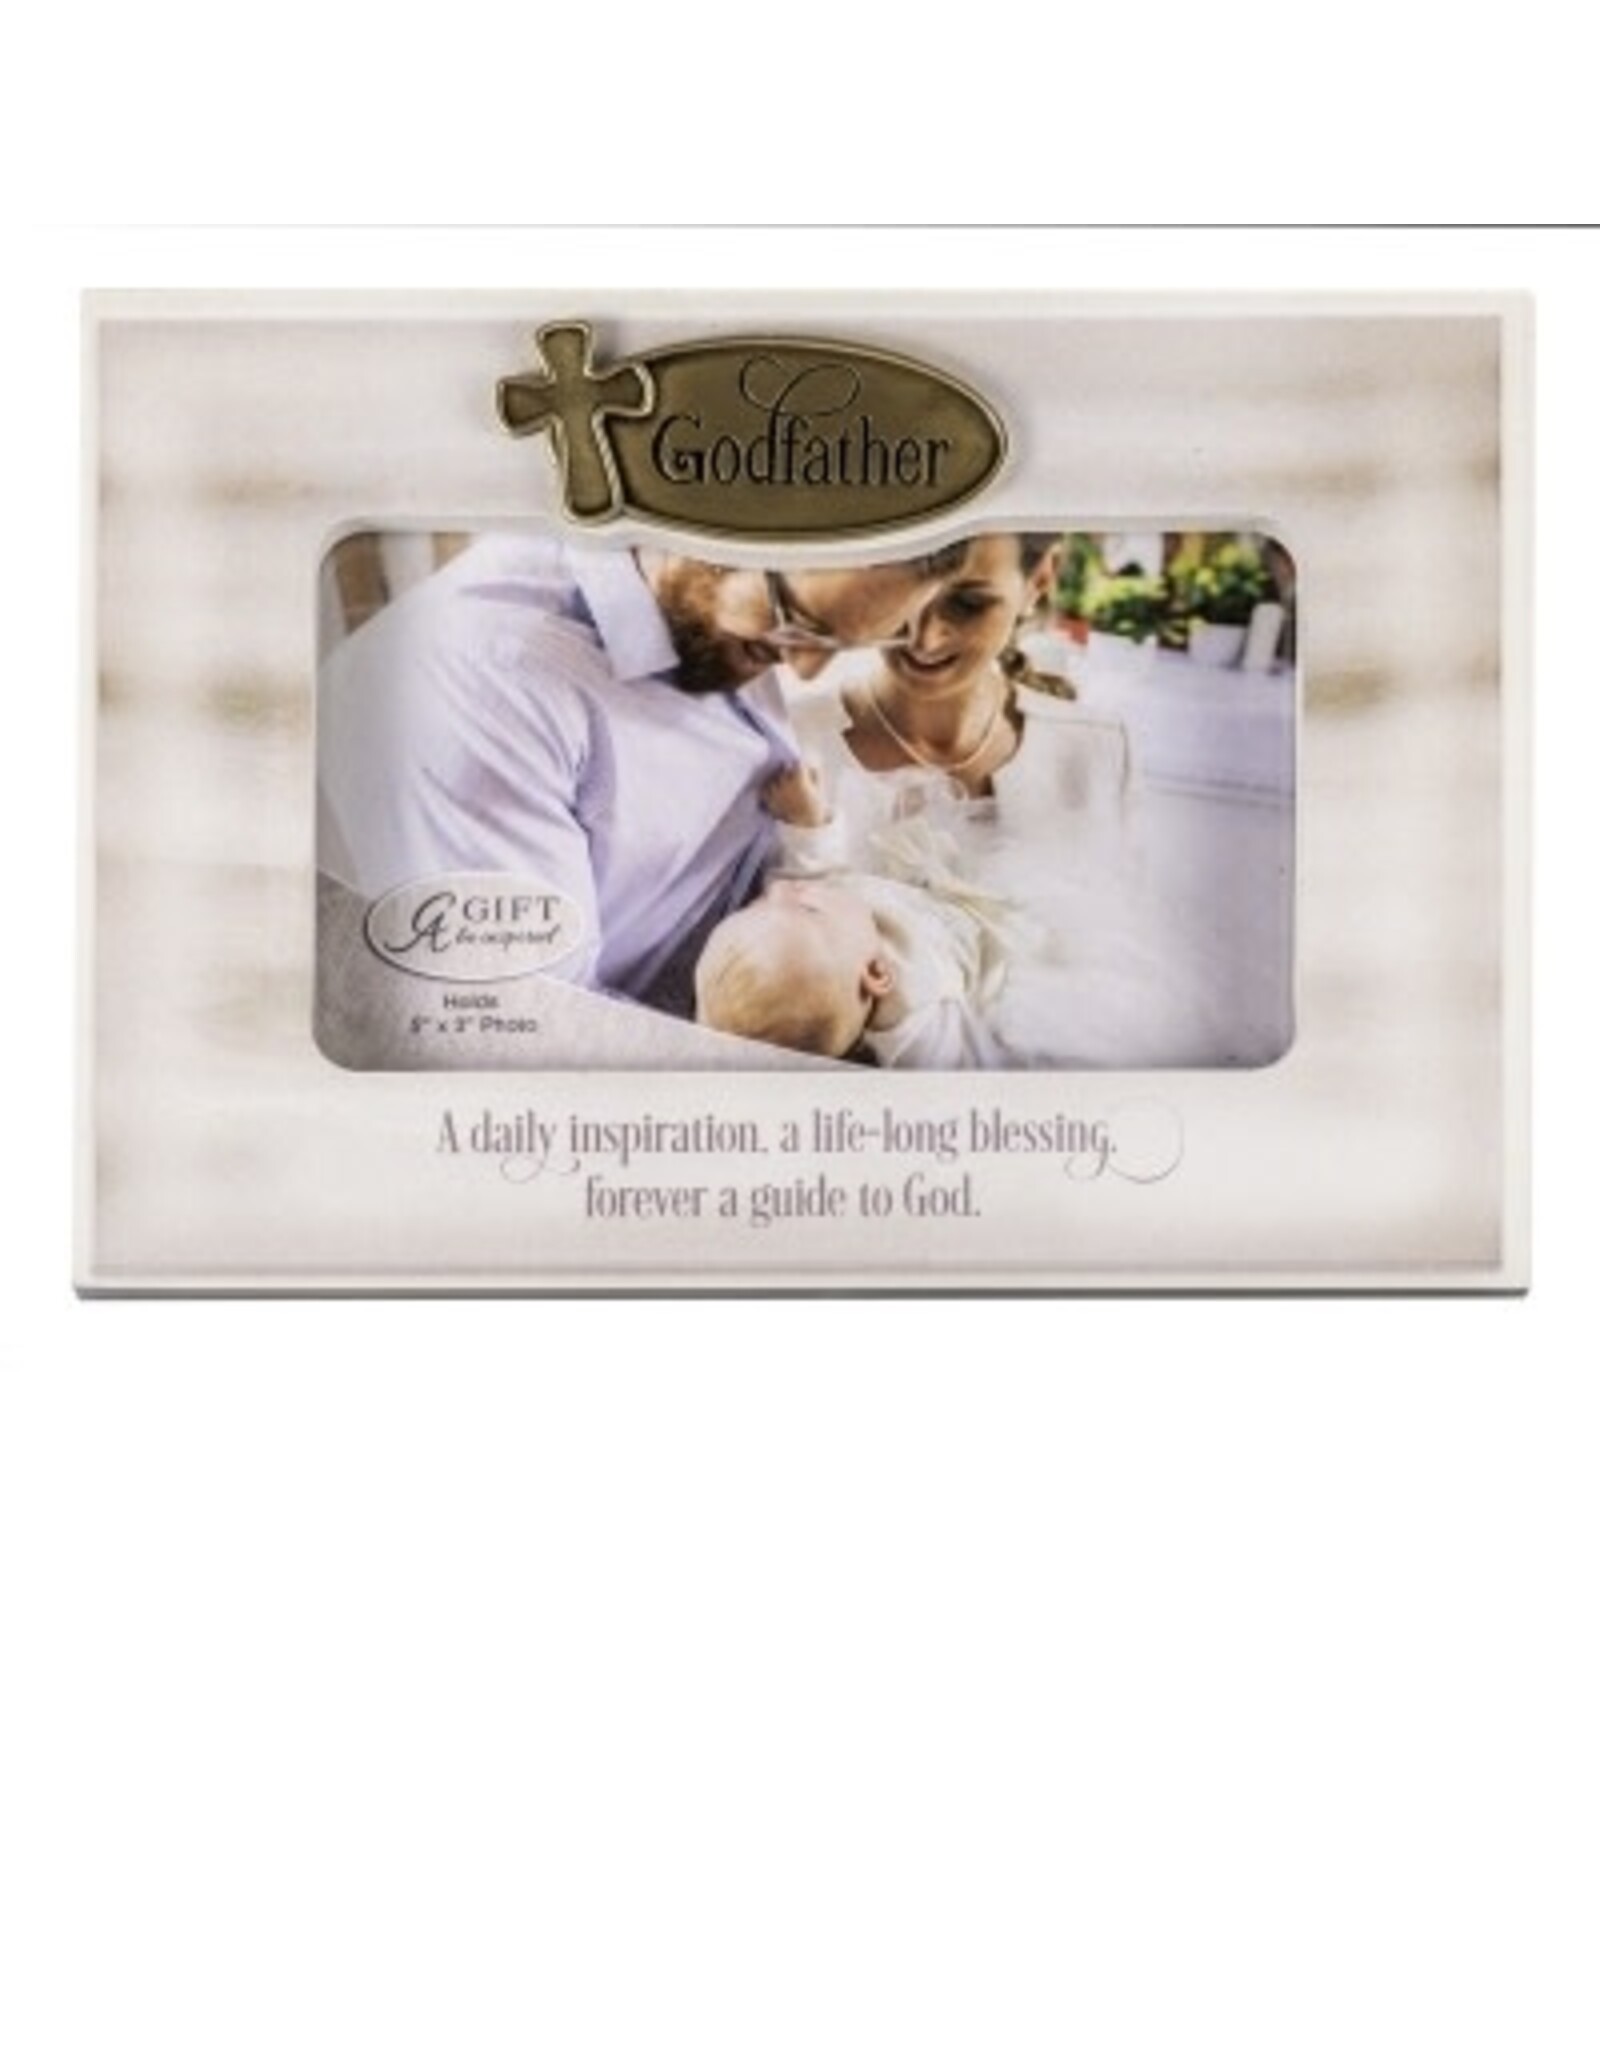 Abbey & CA Gift Godfather Frame "Guide to God"